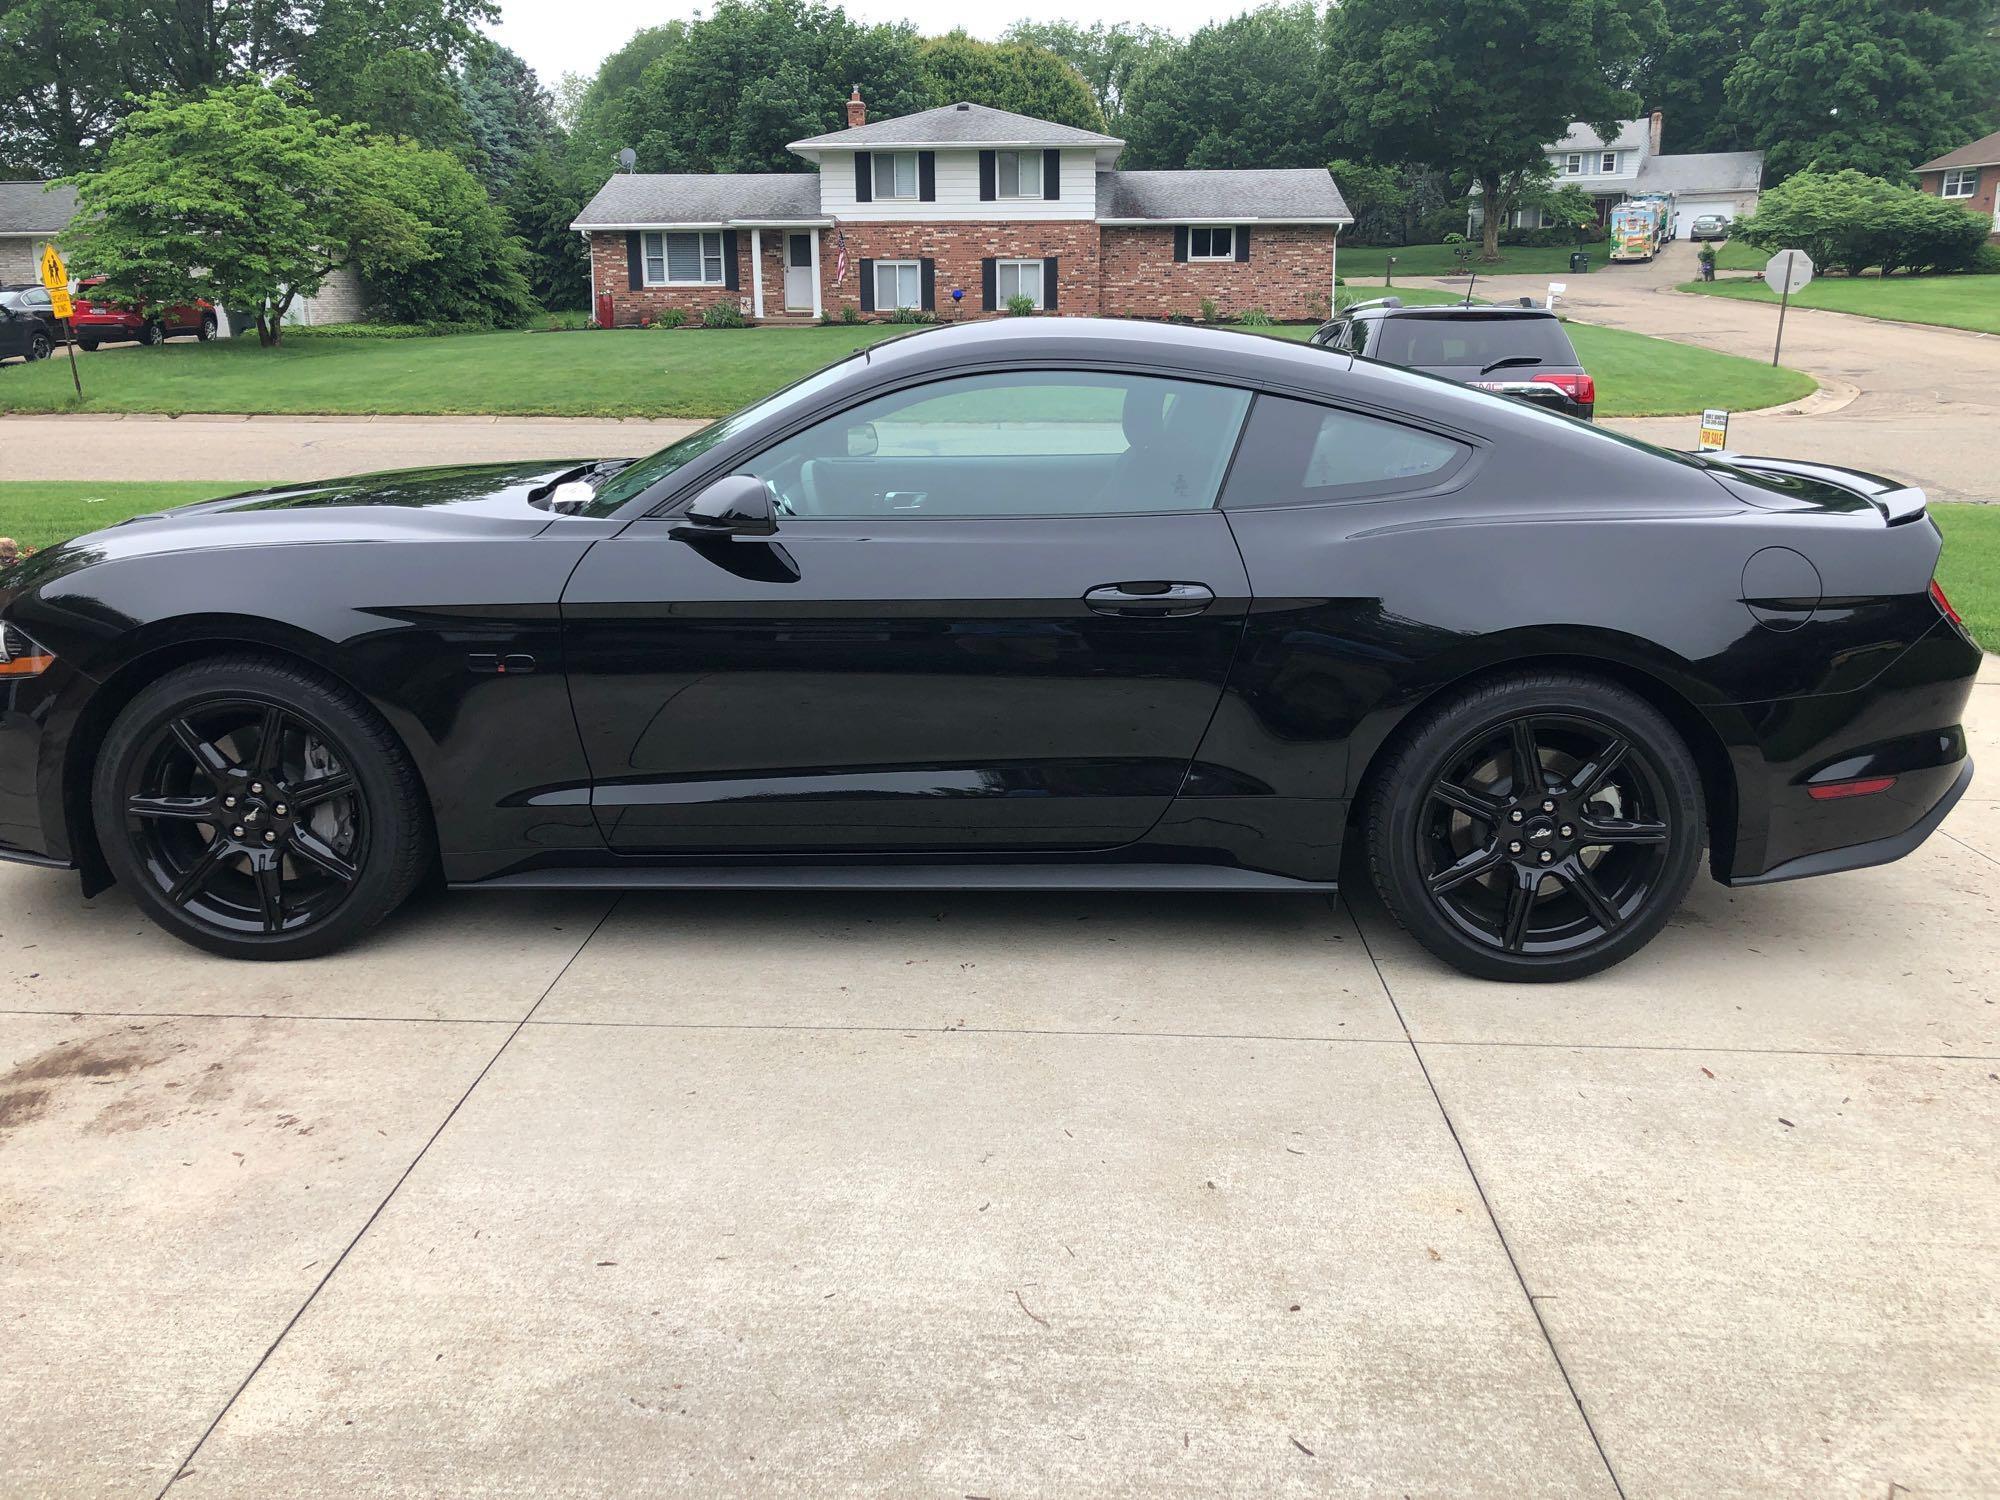 2018 Ford Mustang GT 5.0, one owner, 3,645 mi., 6 speed